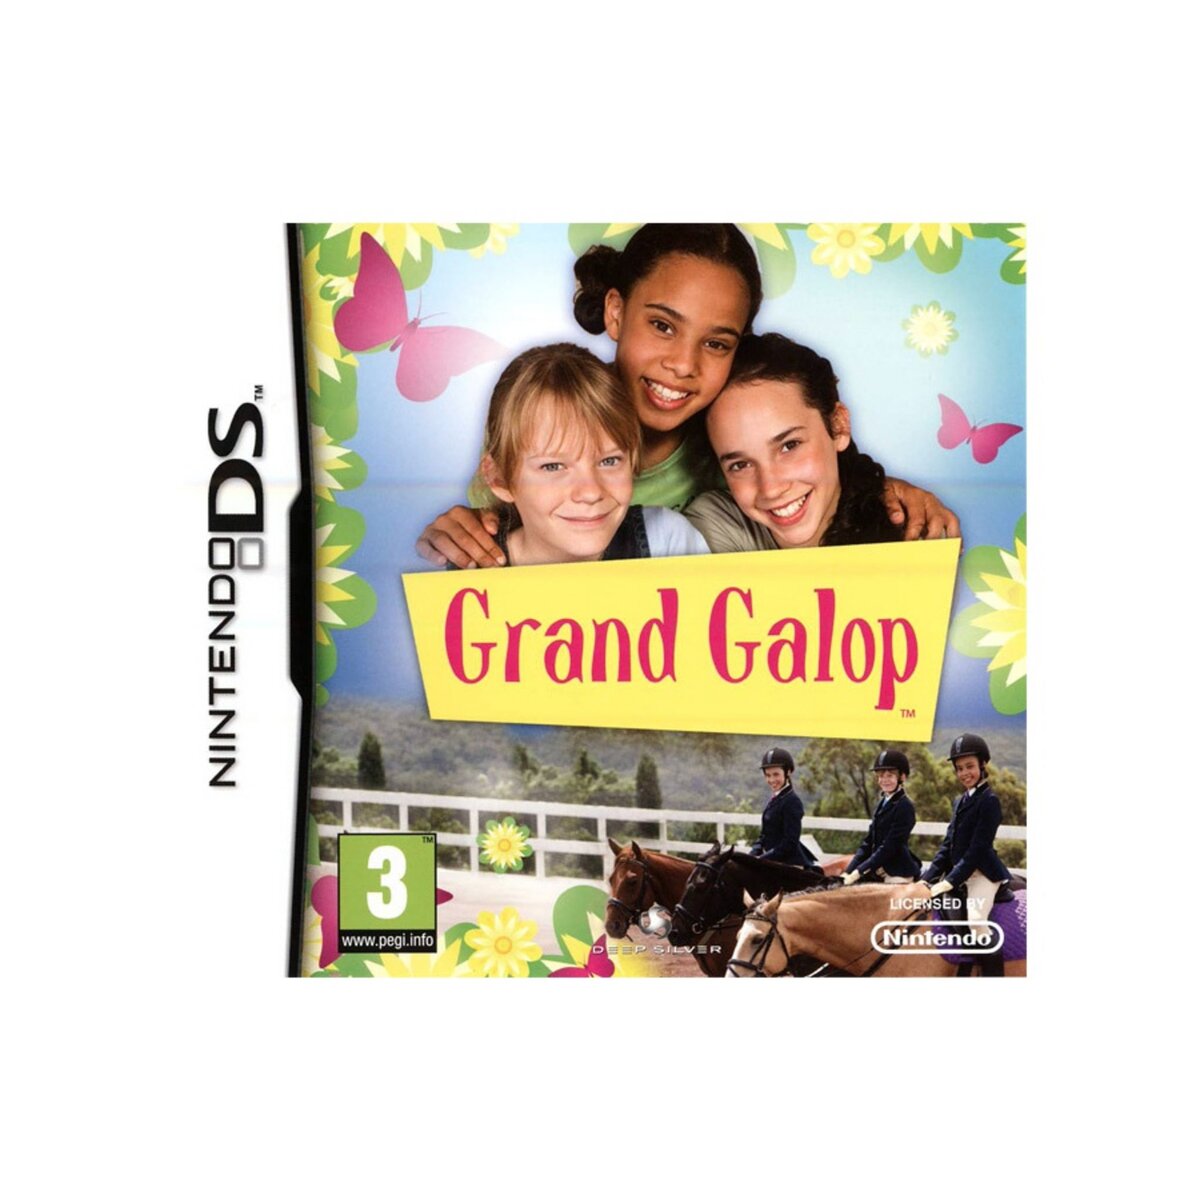 Grand Galop DS